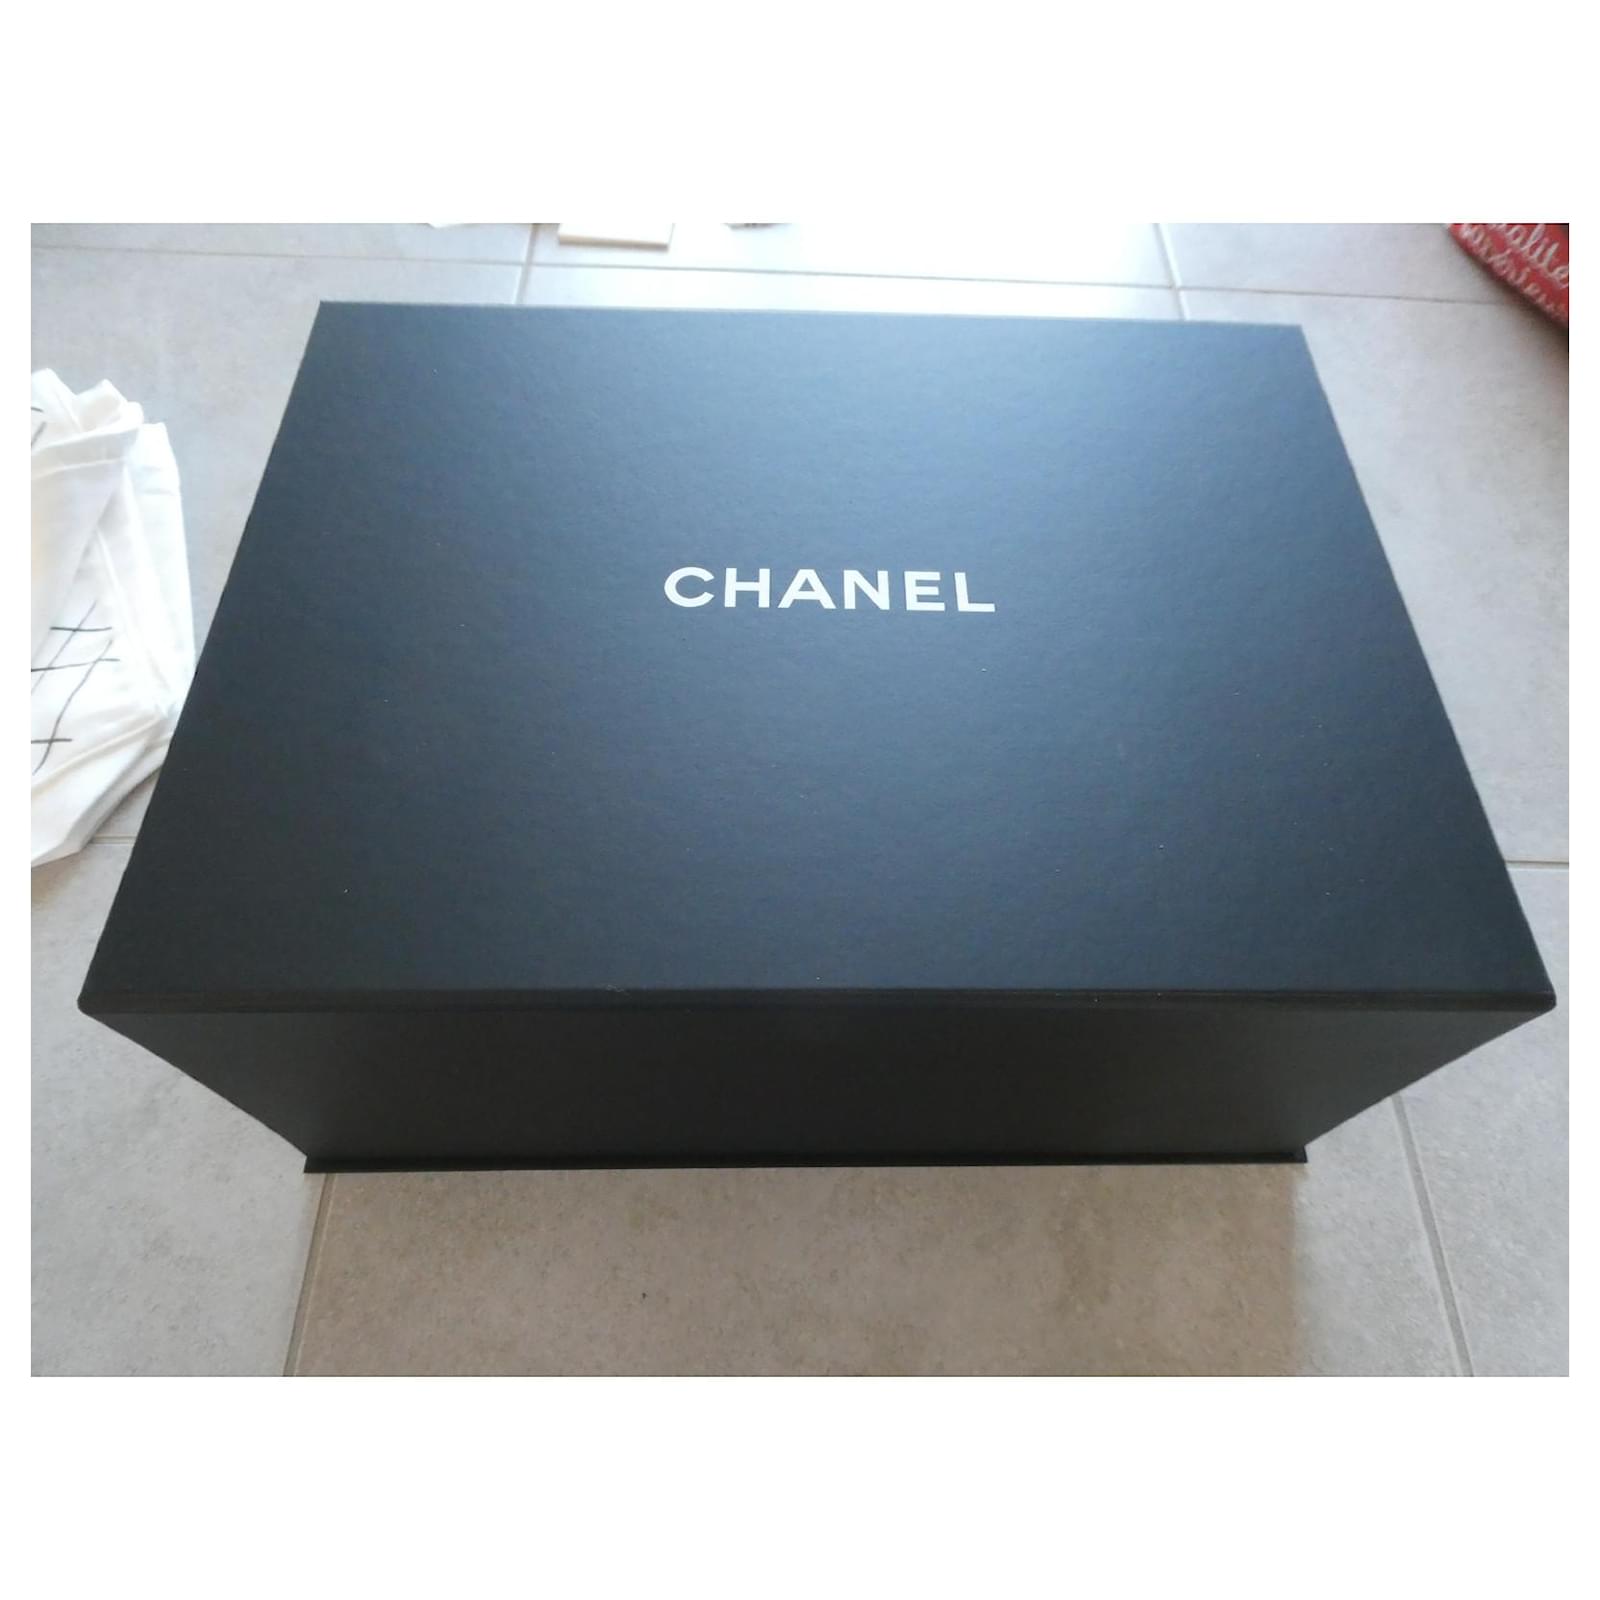 empty chanel box for chanel bag with dustbag